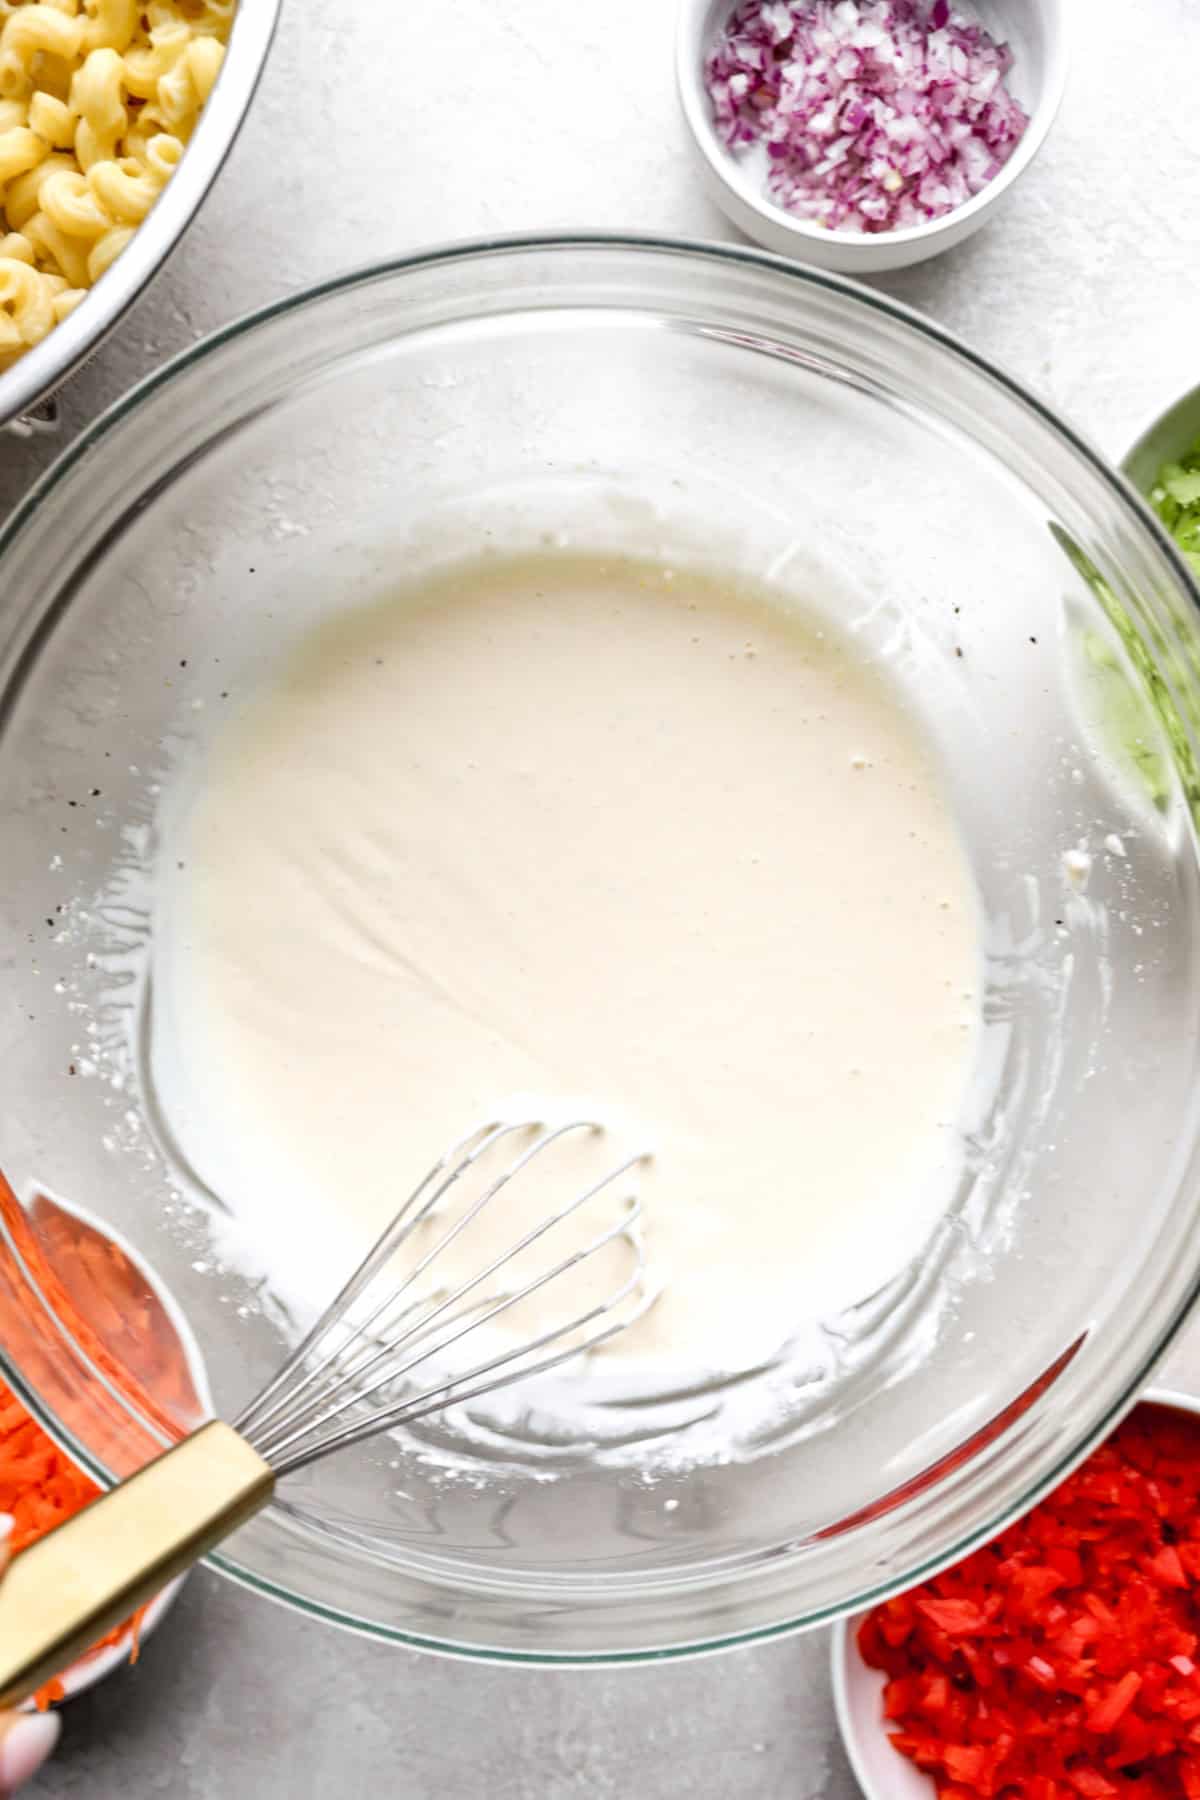 mayo dressing for pasta salad in a mixing bowl with a whisk.